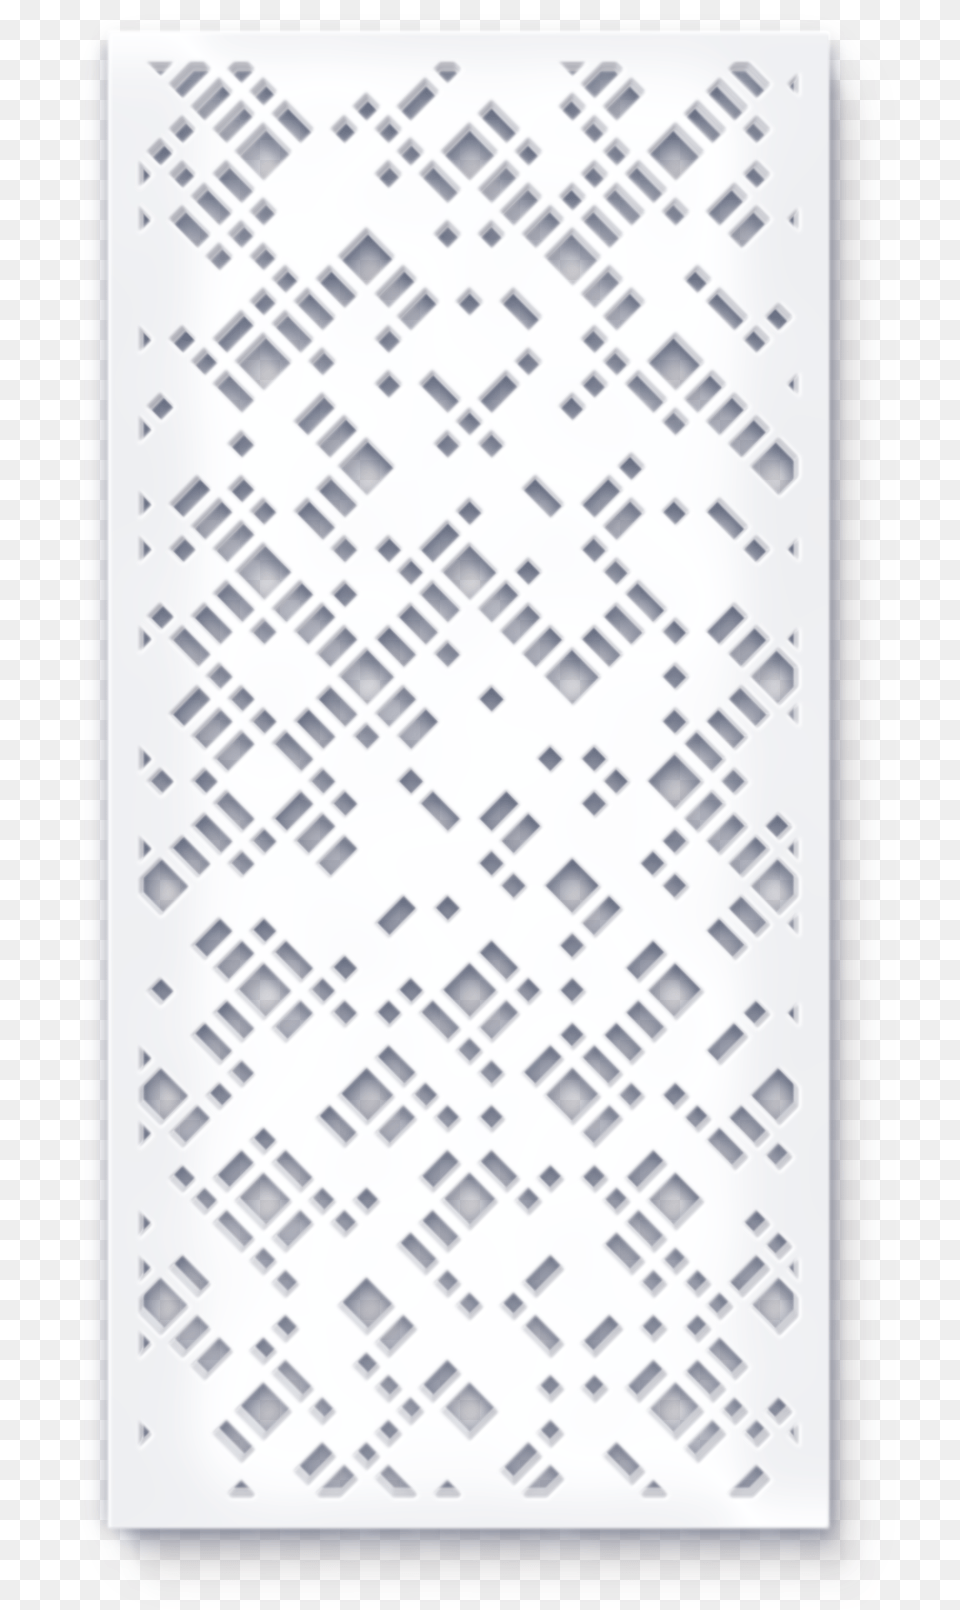 Geometric Patterns, Page, Text, Electronics, Mobile Phone Png